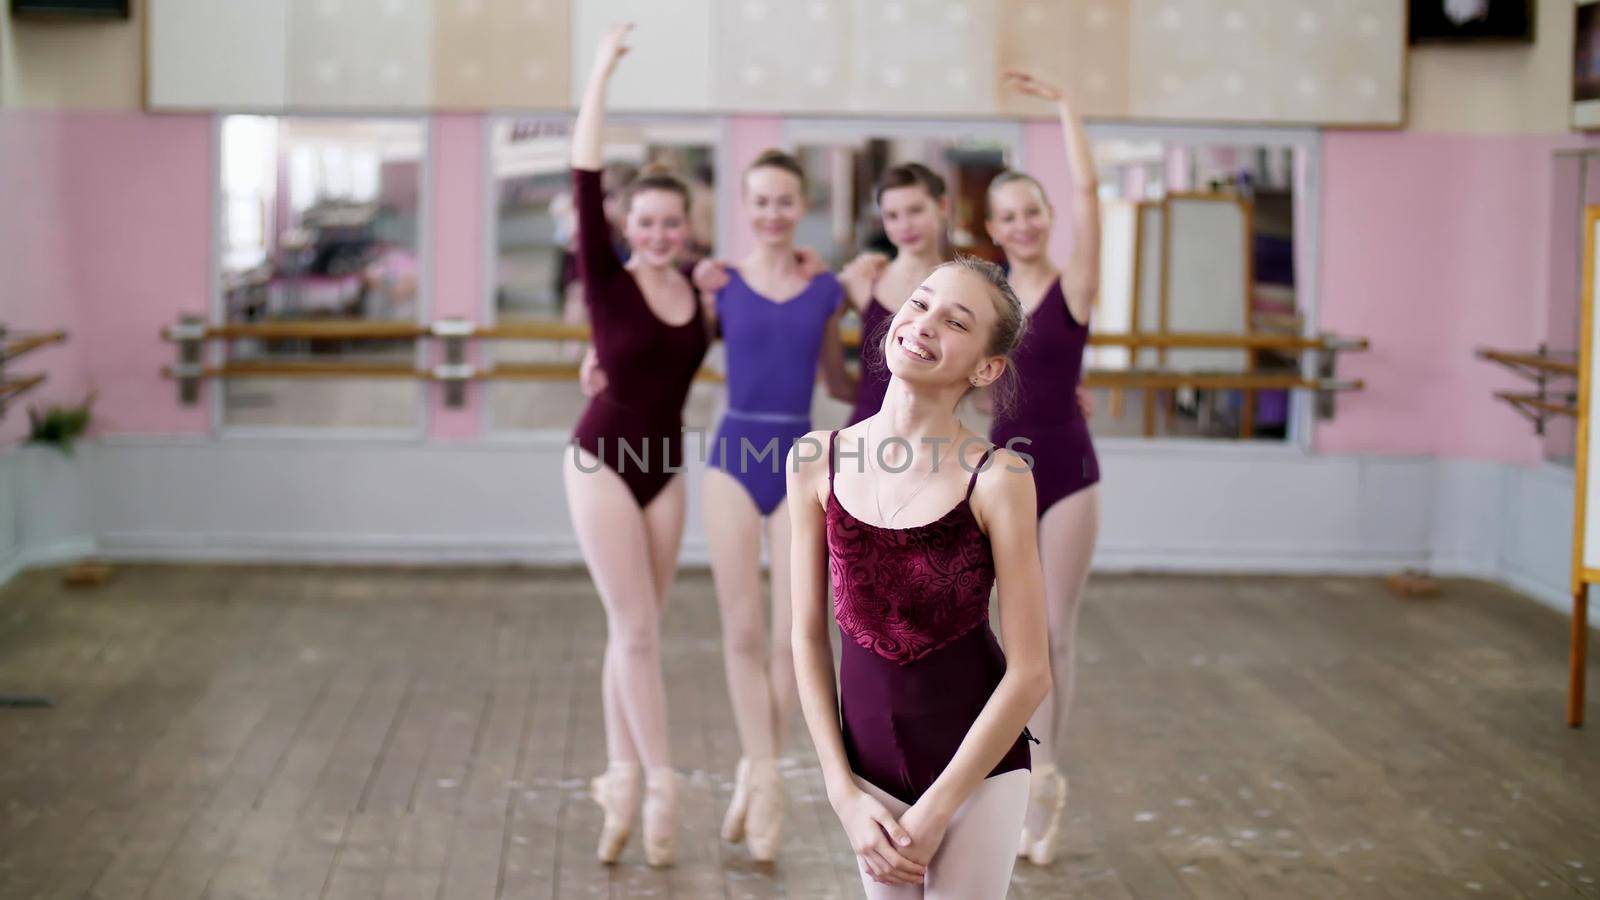 portrait of a young girl ballet dancer in a lilac ballet leotard, smiling, sending an air kiss, gracefully performing a ballet figure. High quality photo